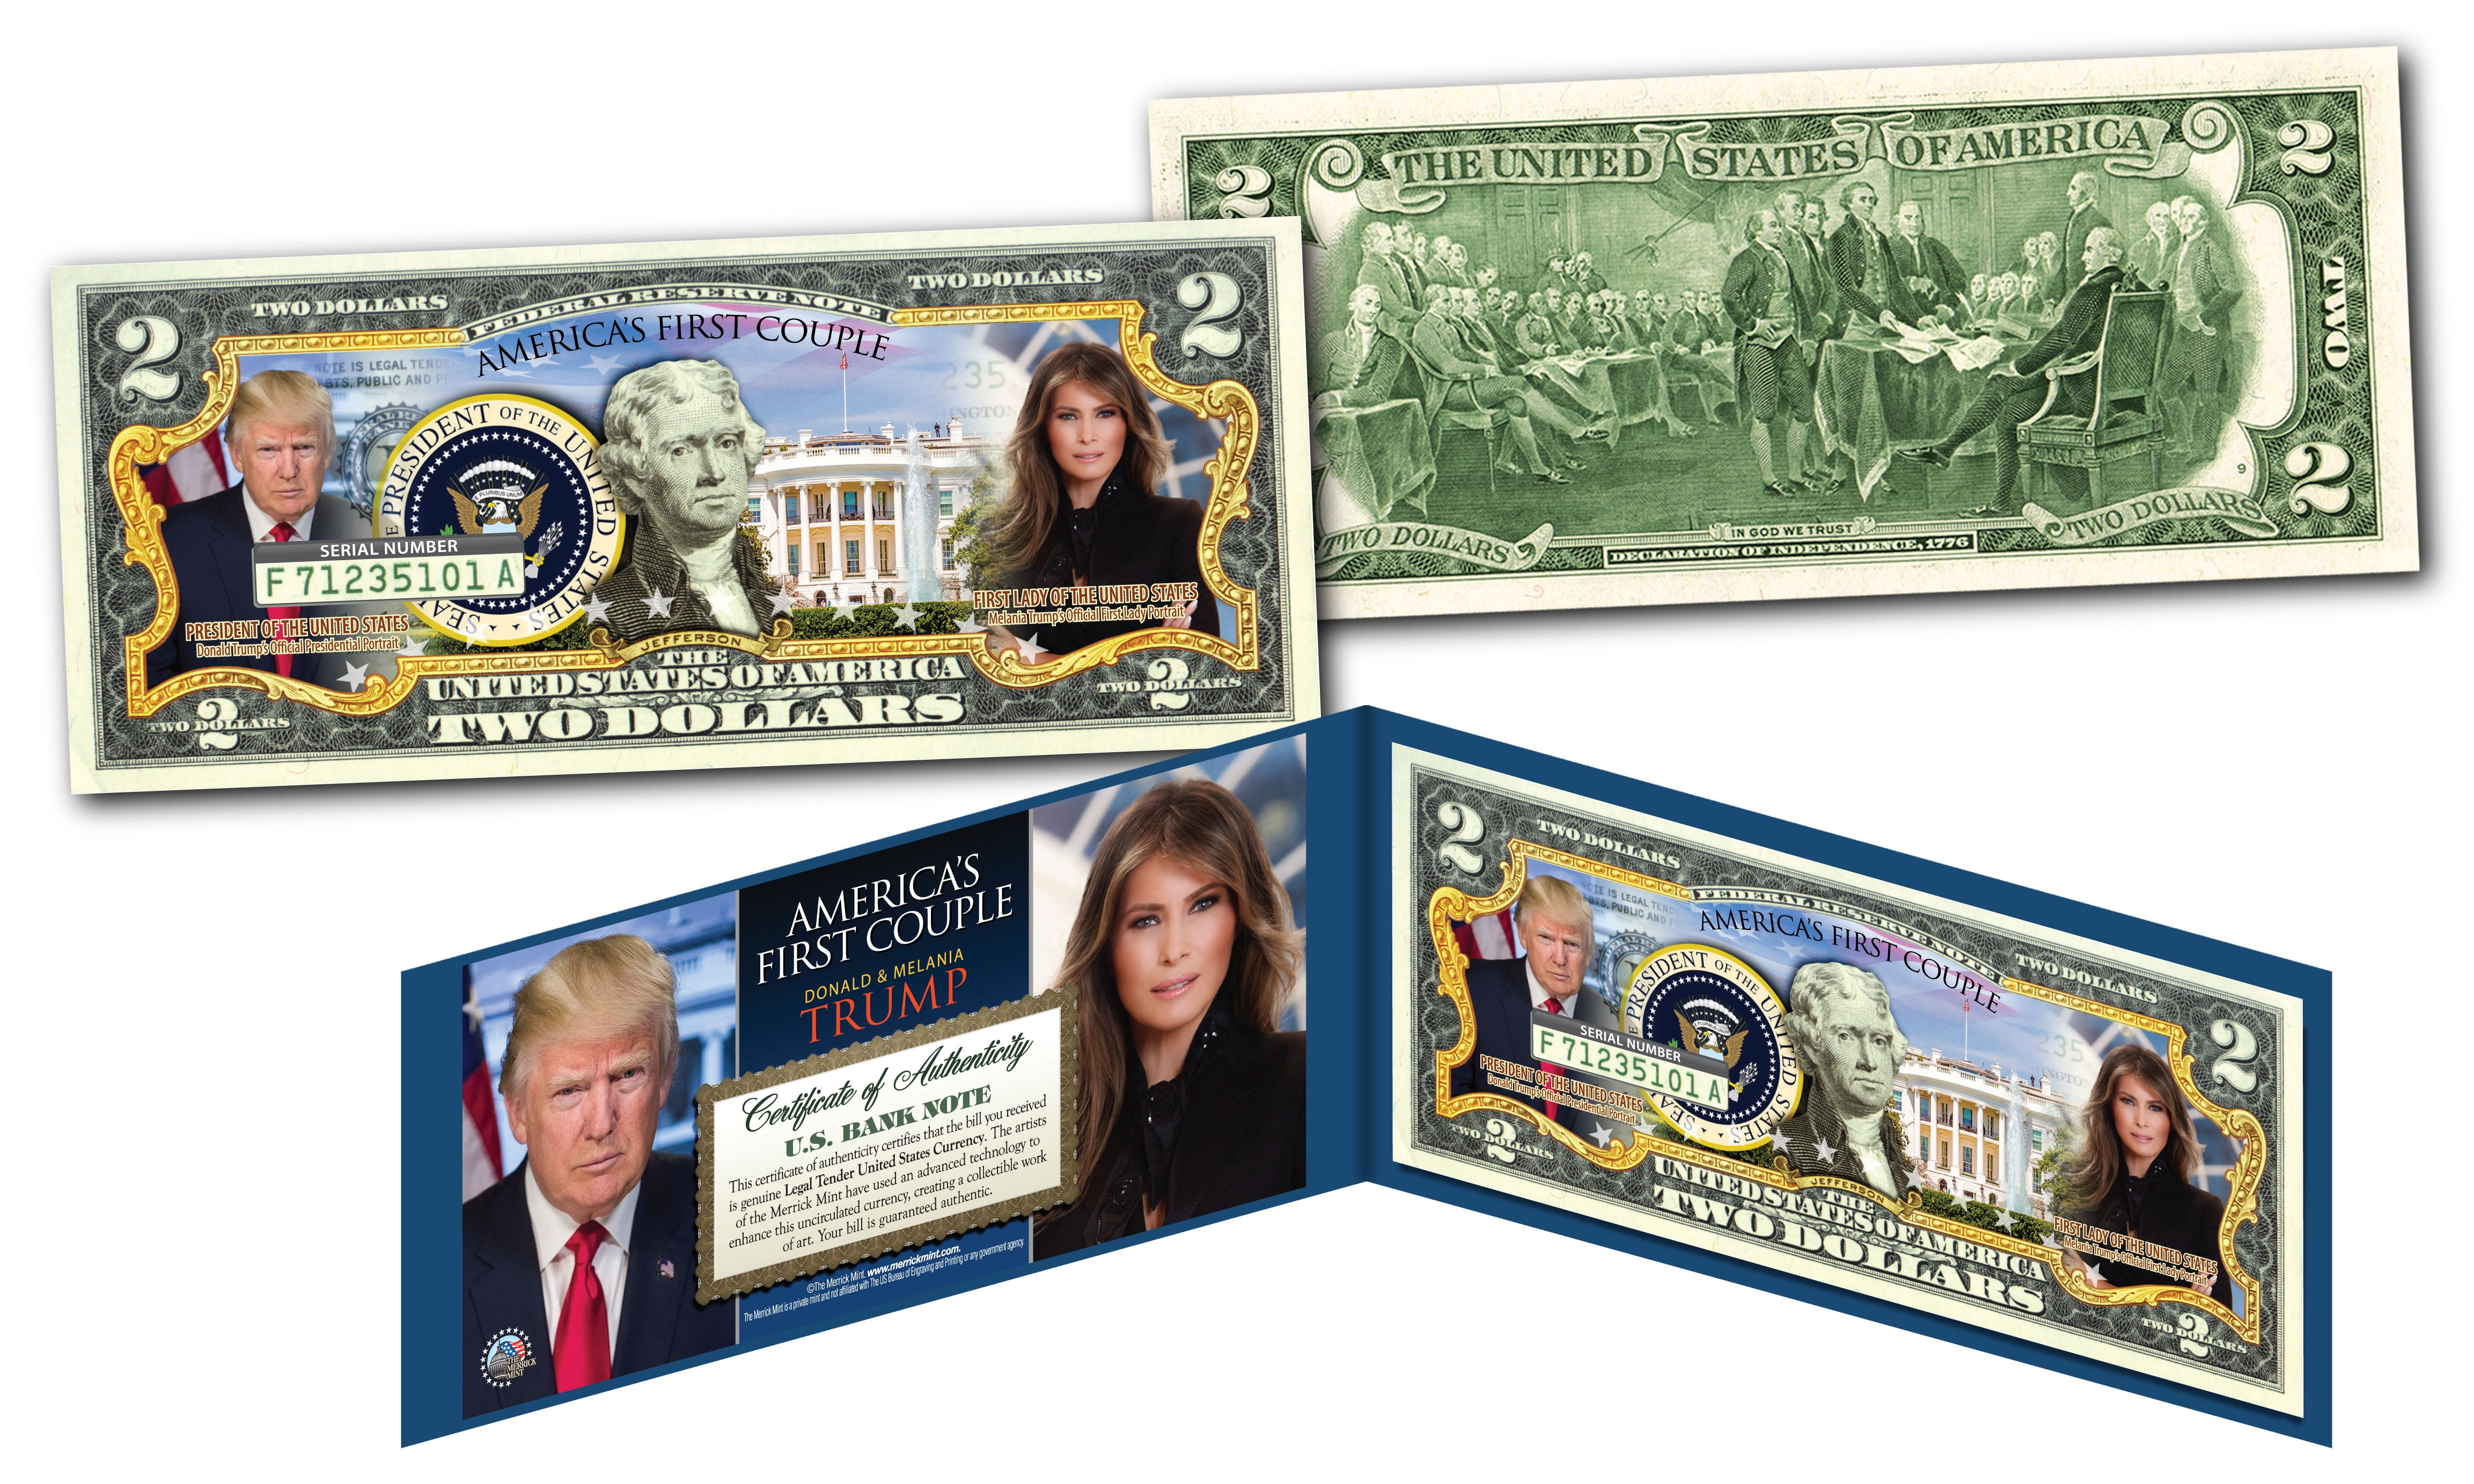 $2 BILL! DONALD TRUMP "45TH PRESIDENT OF THE UNITED STATES" COLORIZED U.S 